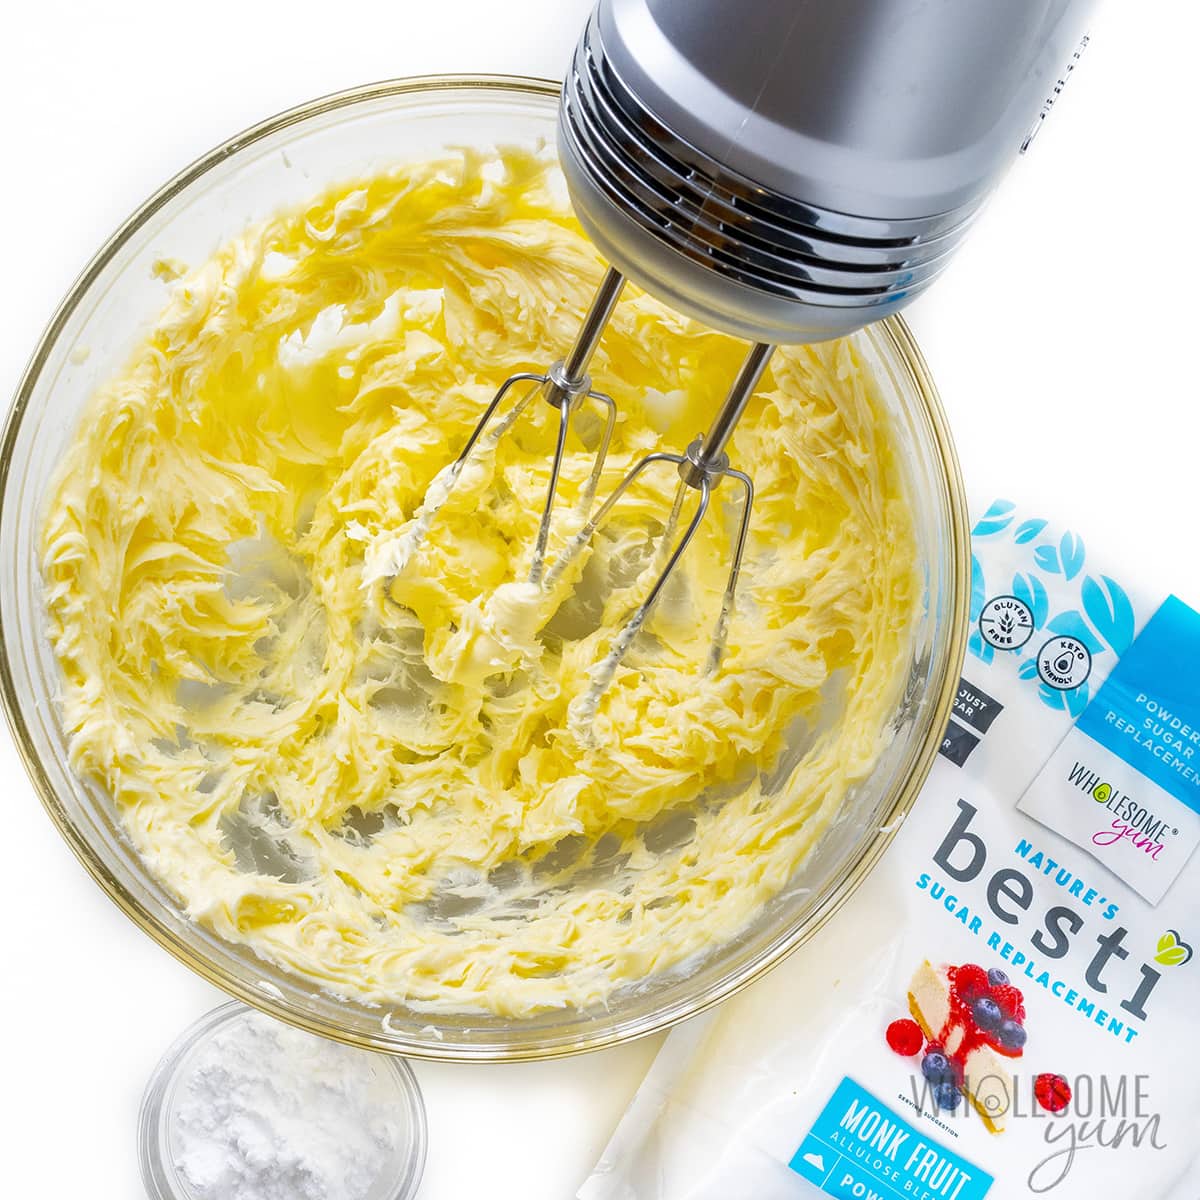 Put butter and Besti in a bowl with an electric mixer.